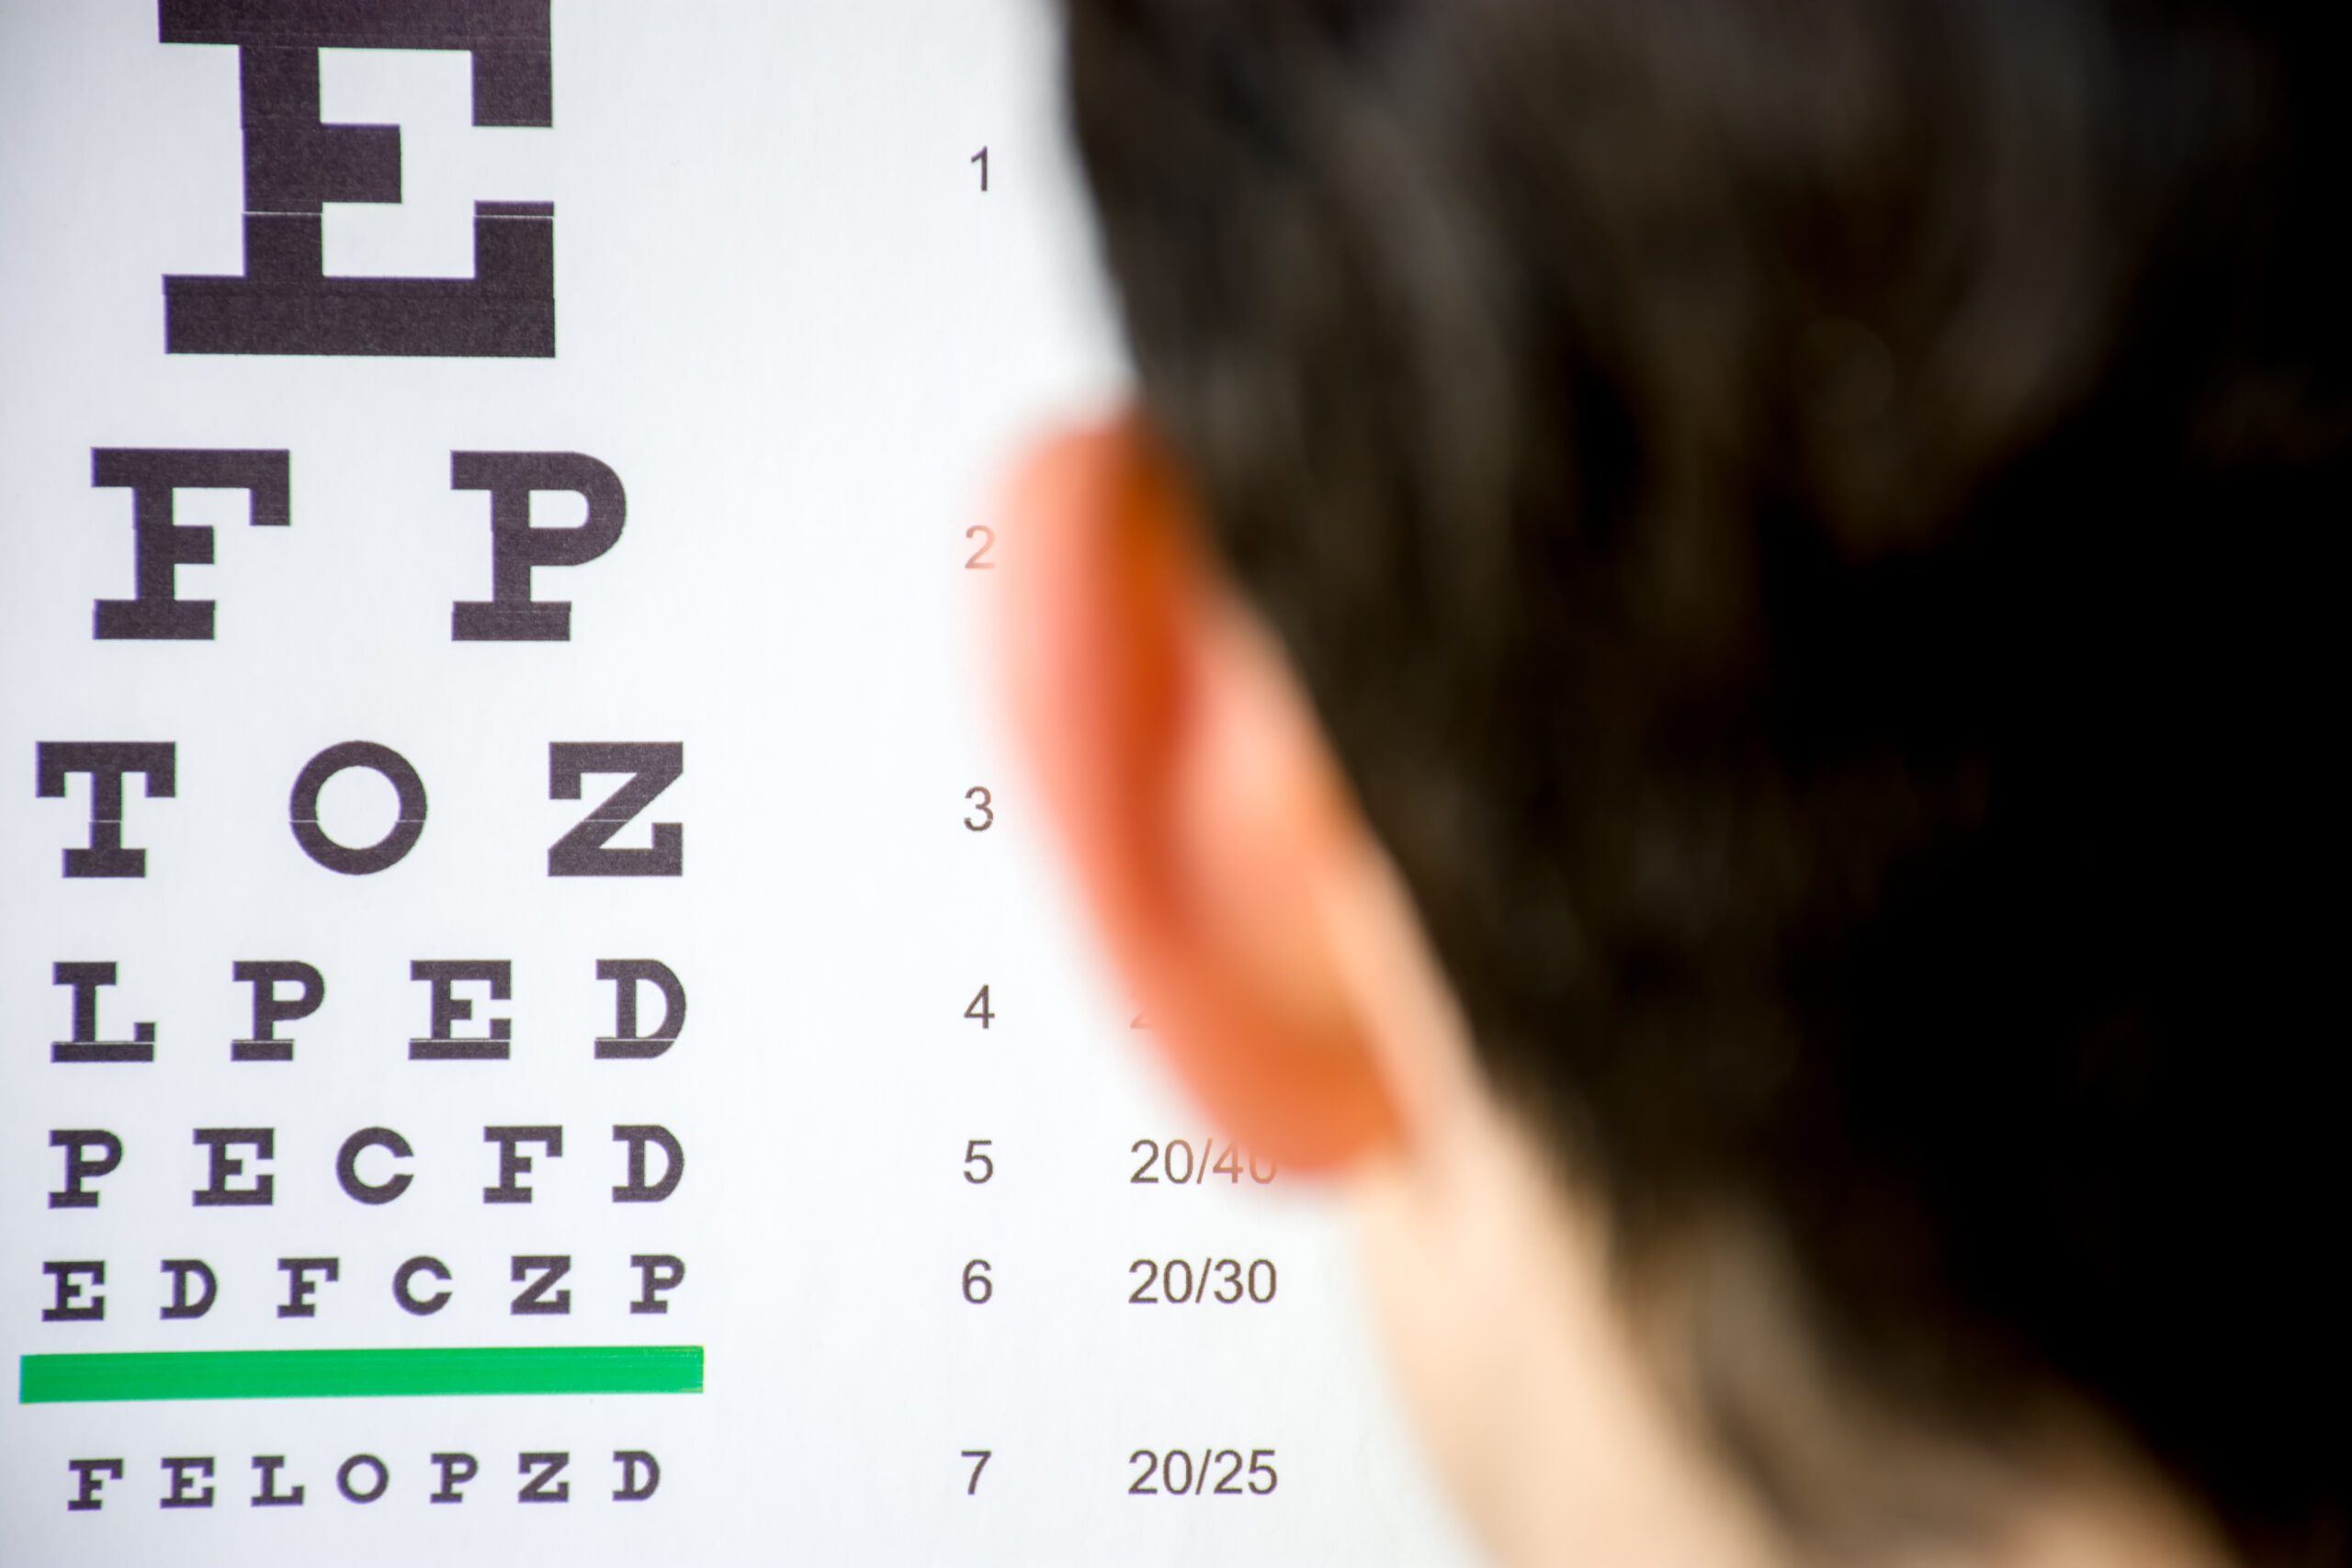 Check visual acuity or ophthalmologist or optometrist visit concept photo. Table for testing visual acuity in background in focus and blurred defocused silhouette of human head in the foreground